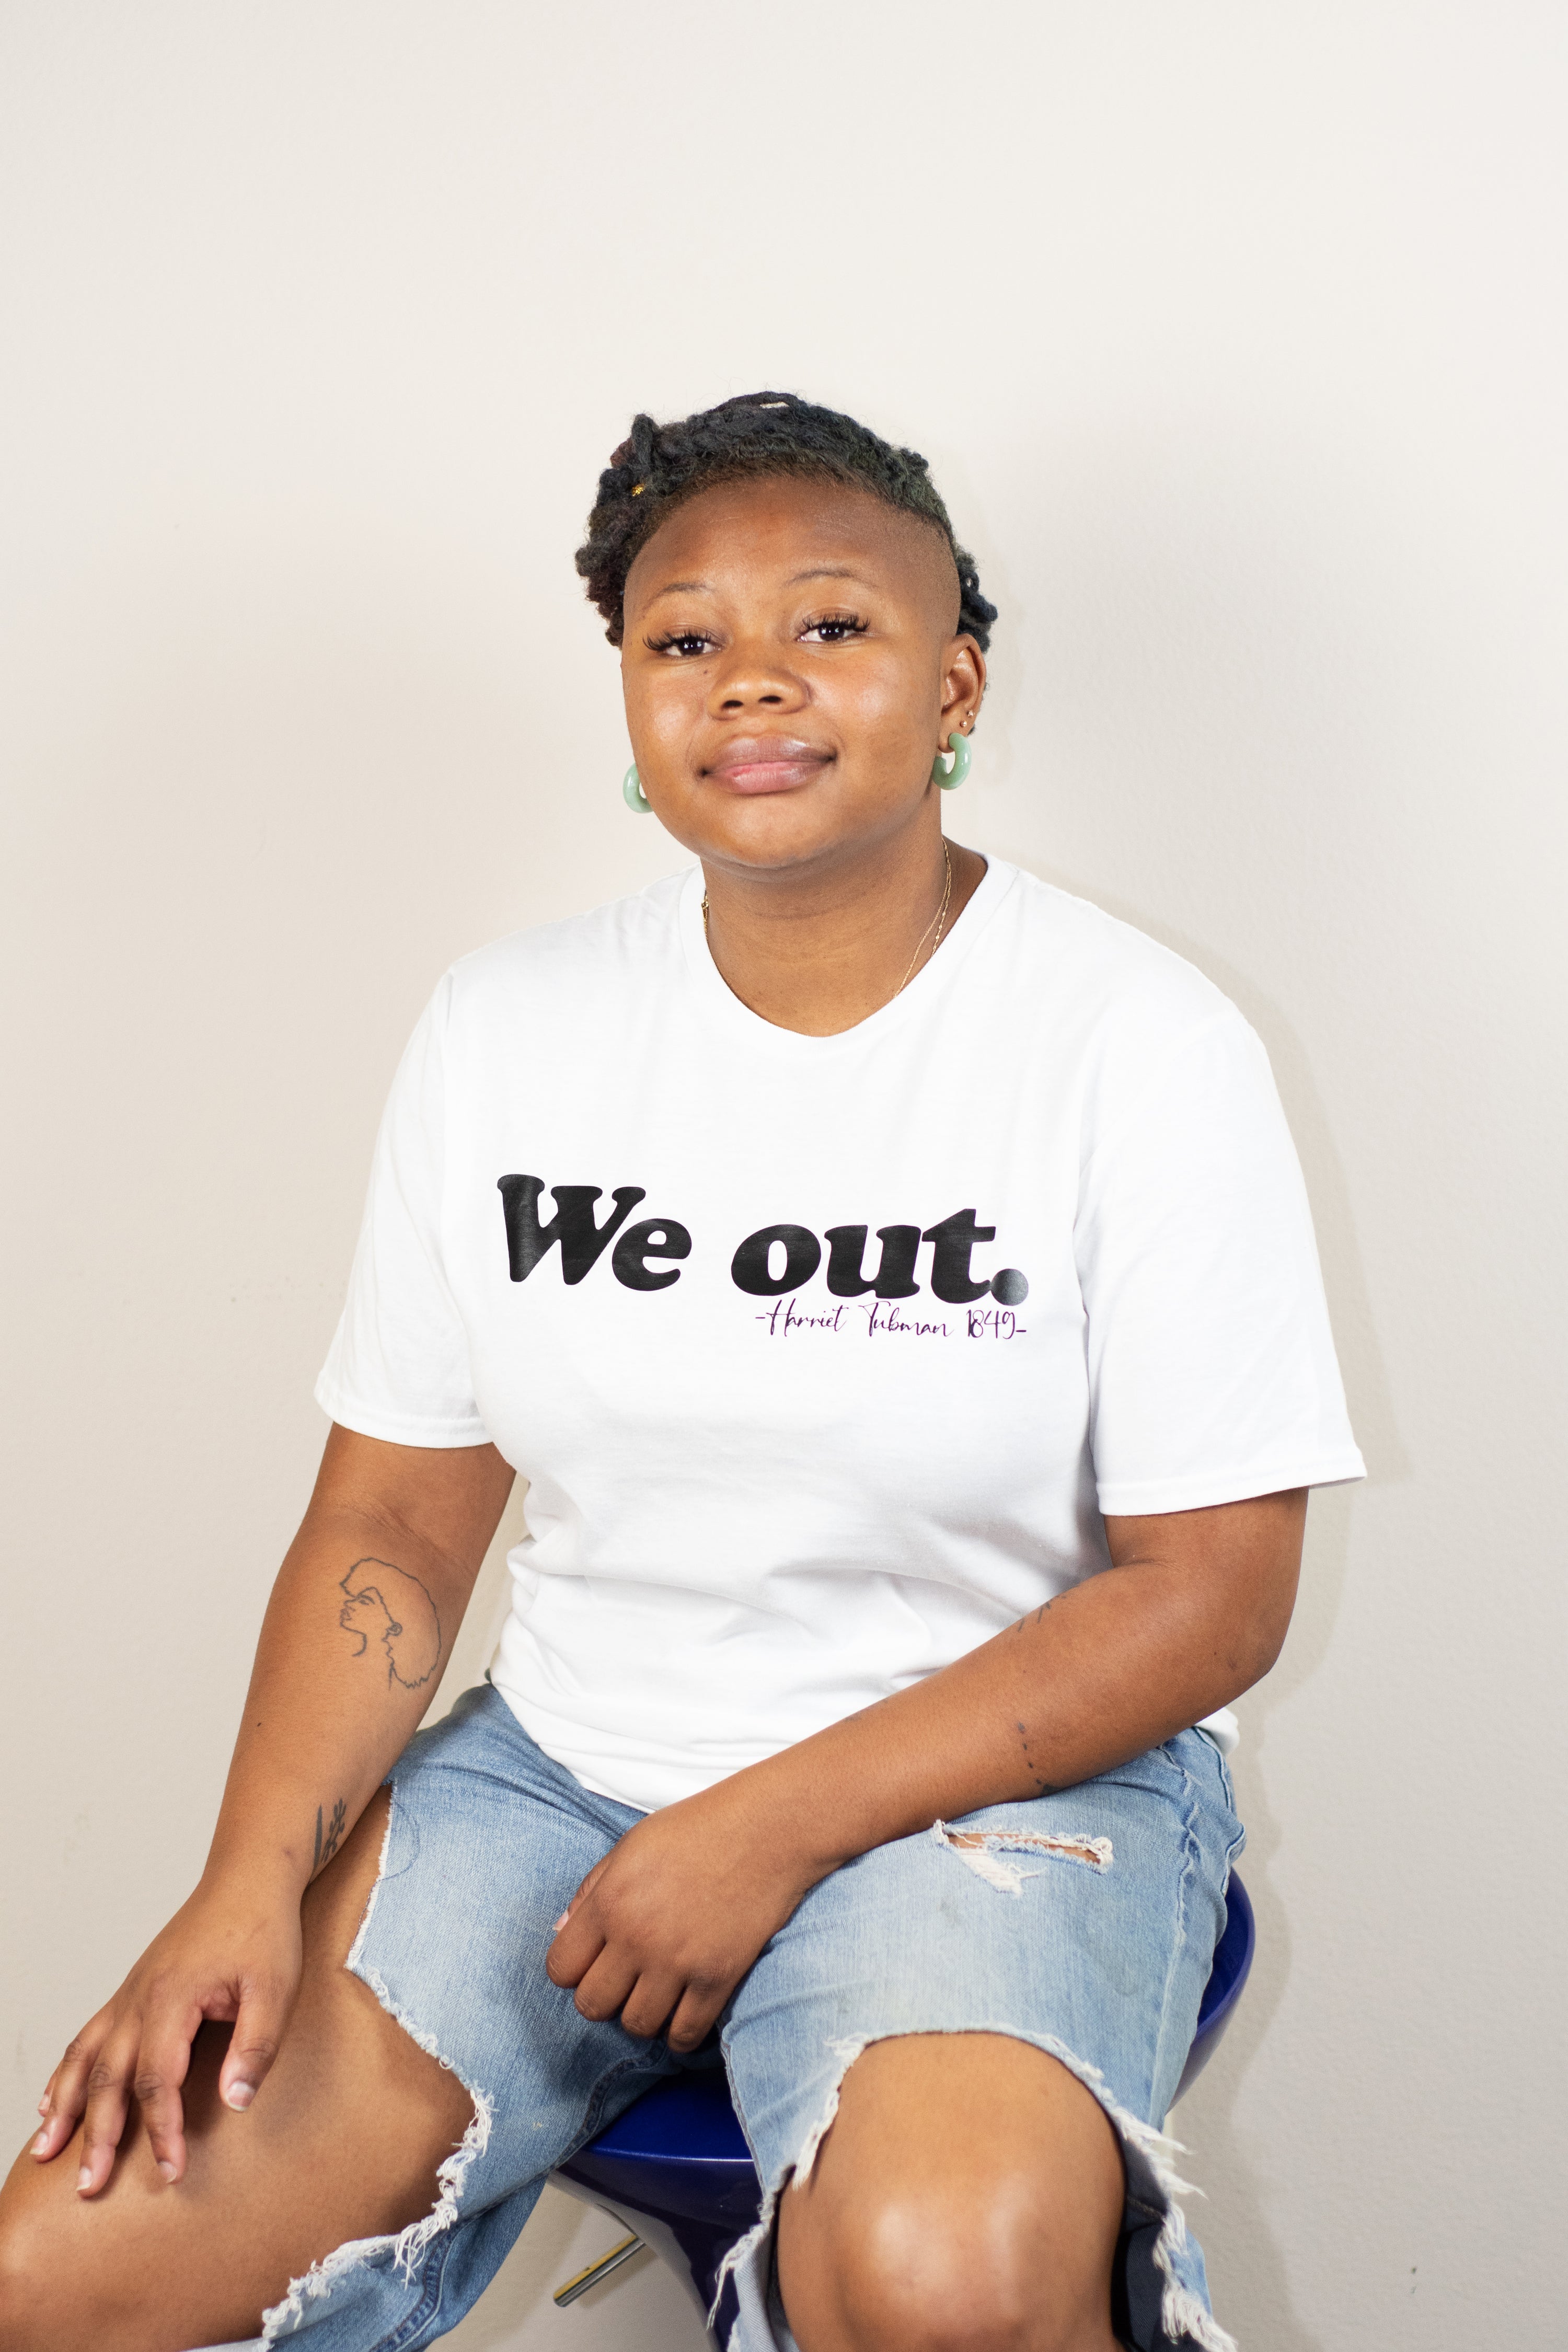 We Out - Harriet Tubman T-shirt